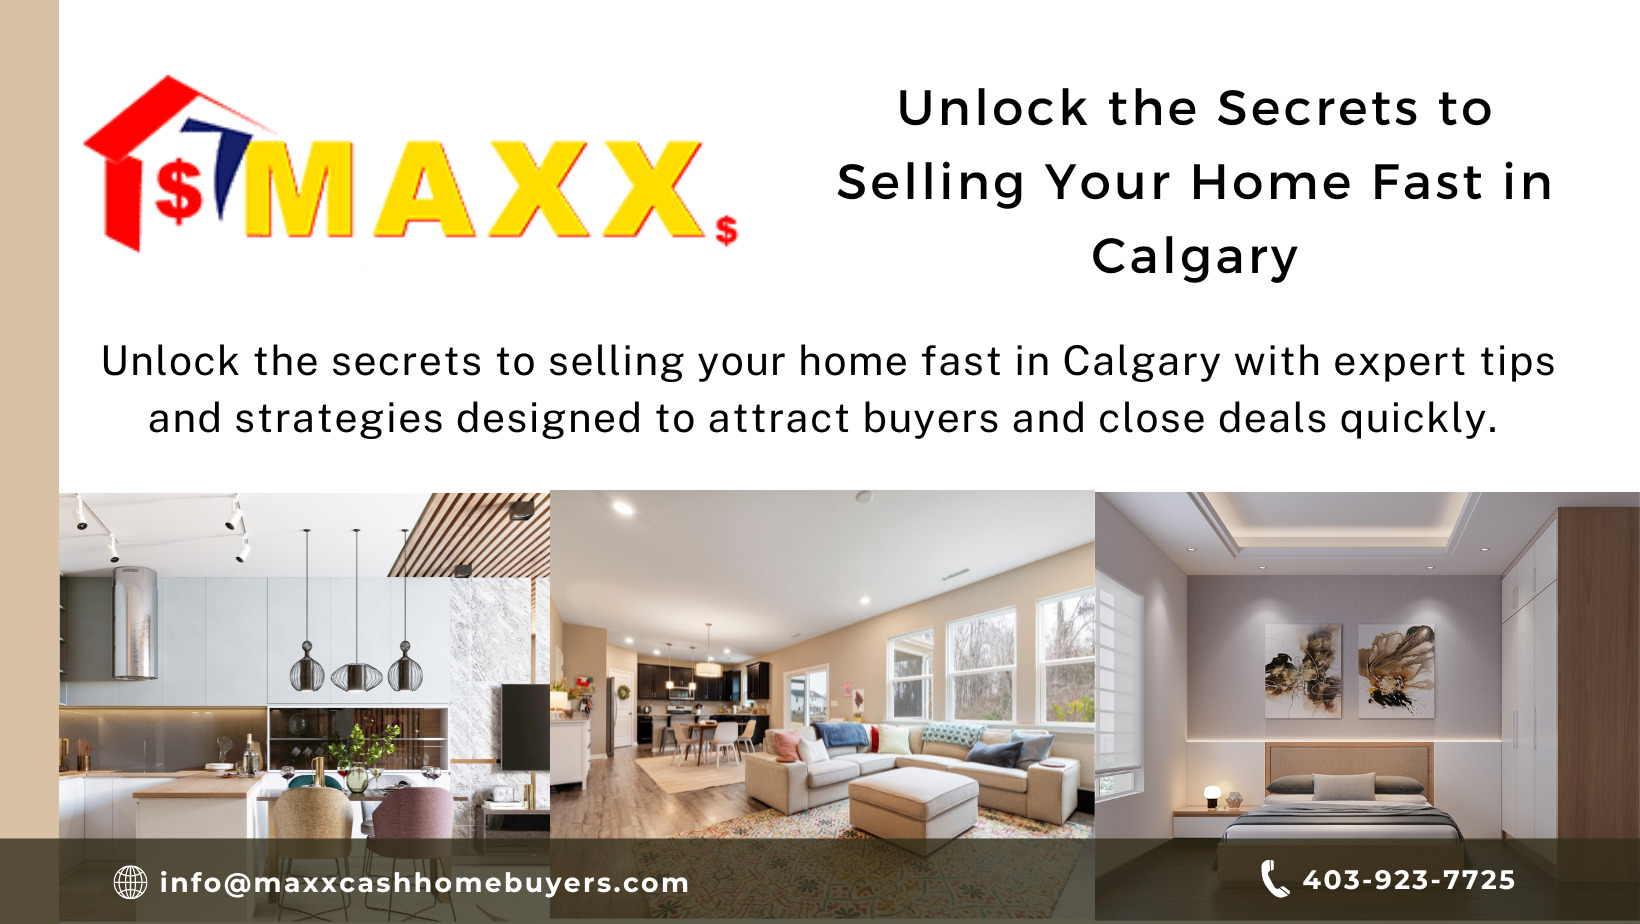 Unlock the Secrets to Selling Your Home Fast in Calgary